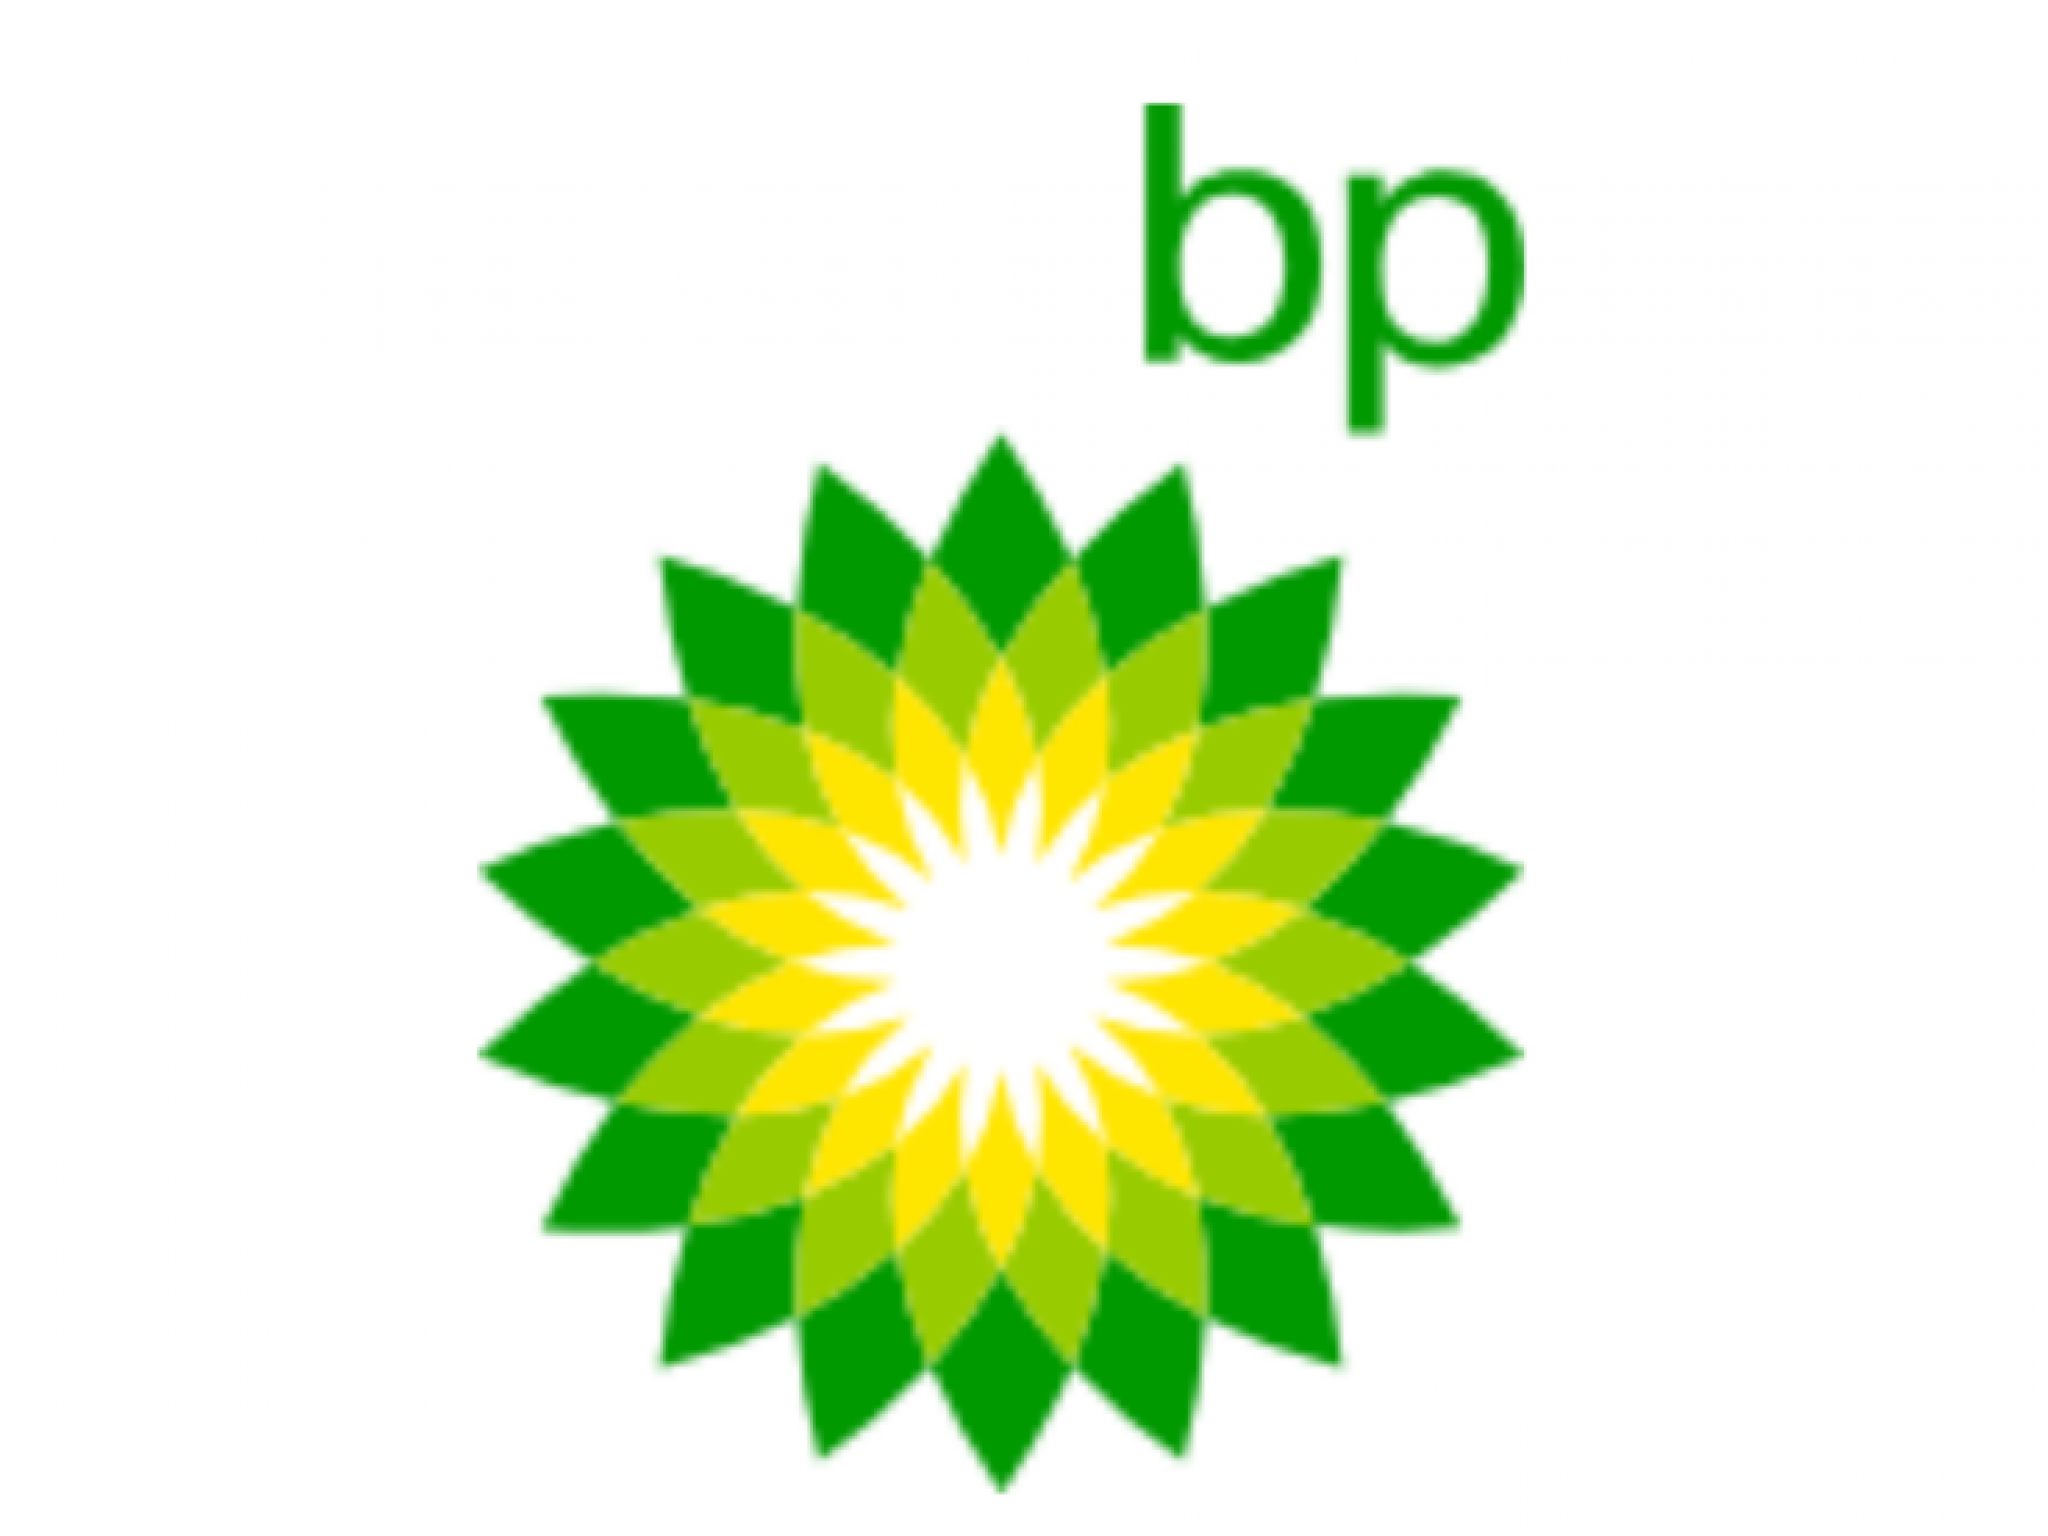  is-bp-bailing-on-green-reportedly-shifts-gears-from-renewables-to-oil-and-gas 